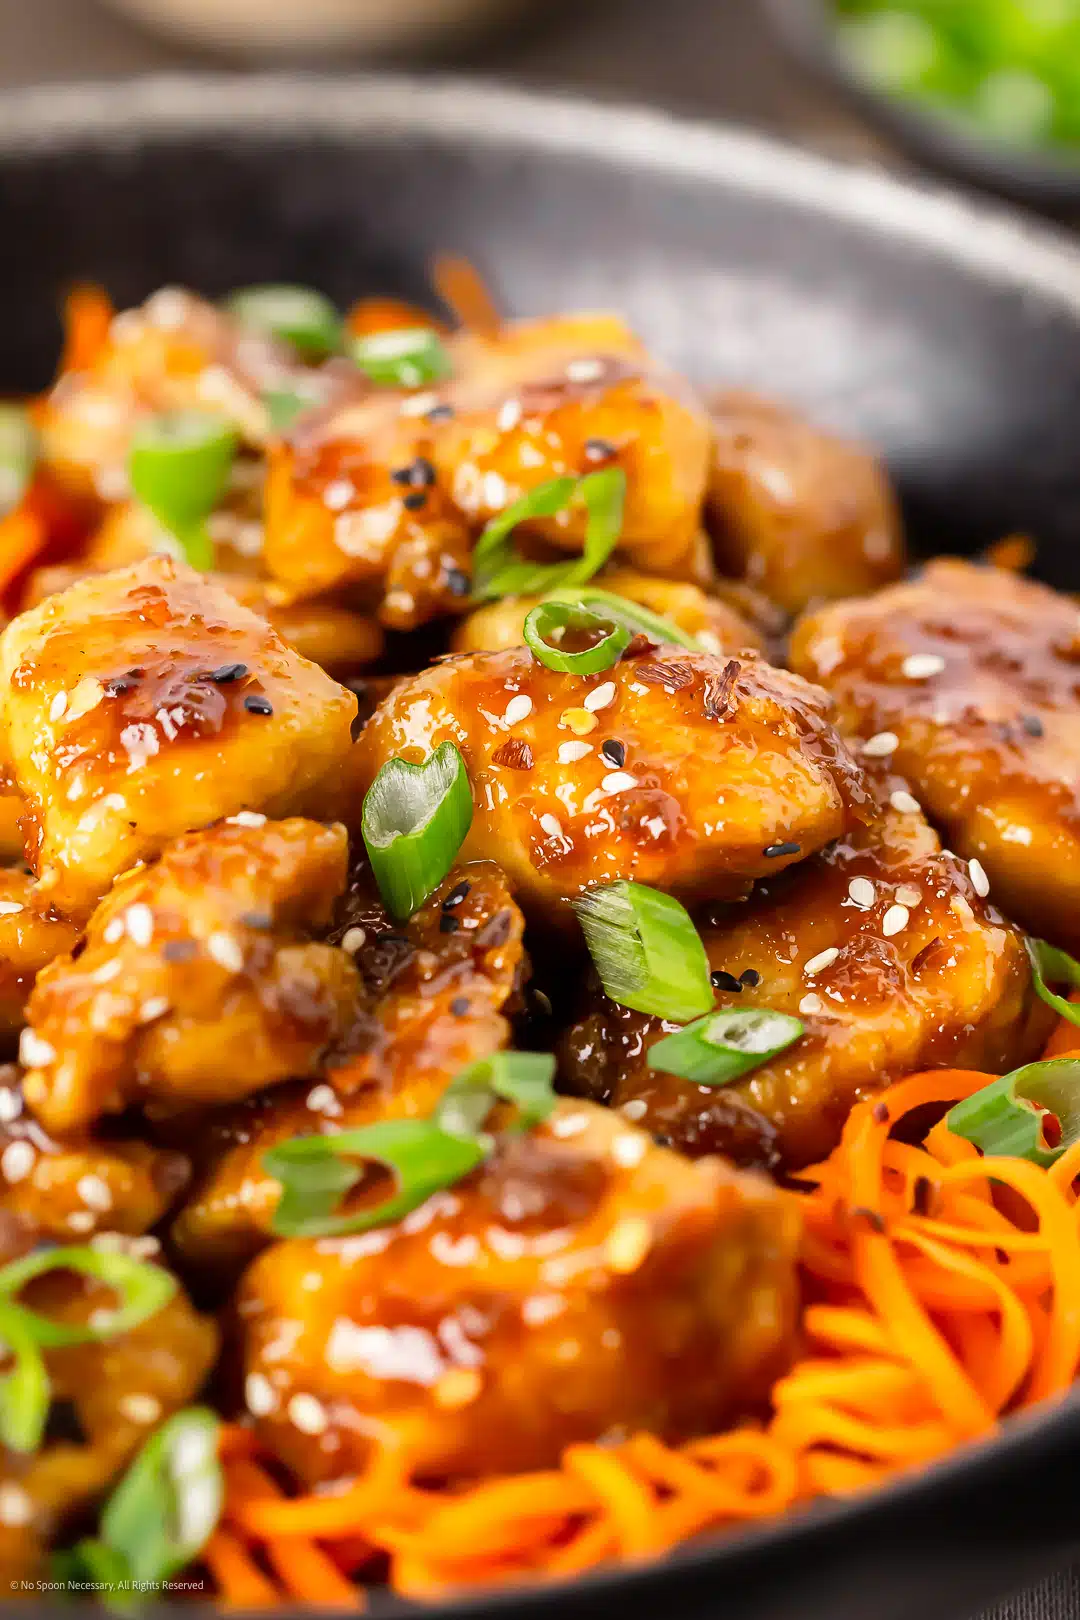 Close-up angled photo of a bowl of stir fry honey garlic chicken with spiralized carrots, sesame seeds, and green onions.